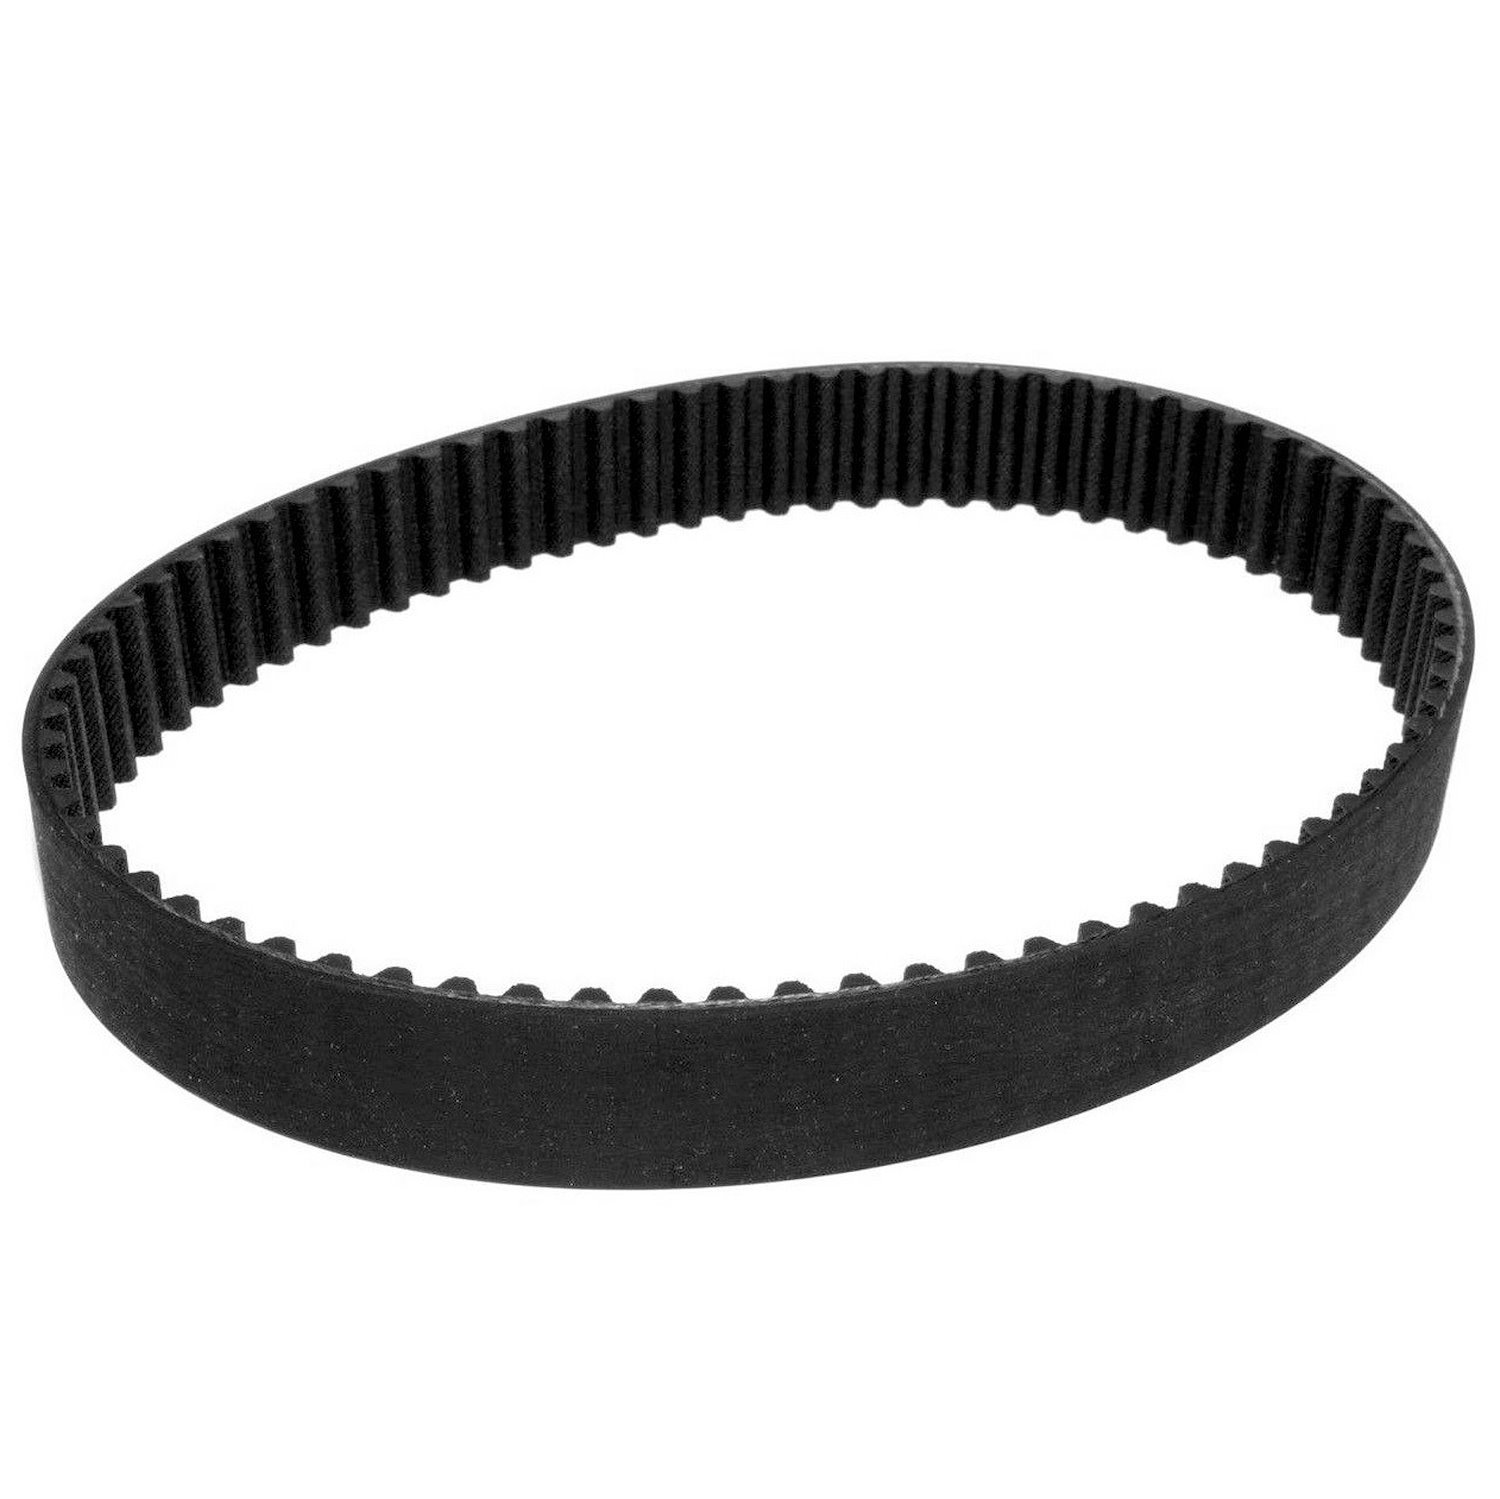 Replacement Timing Belt for Speedmaster PCE262.1002